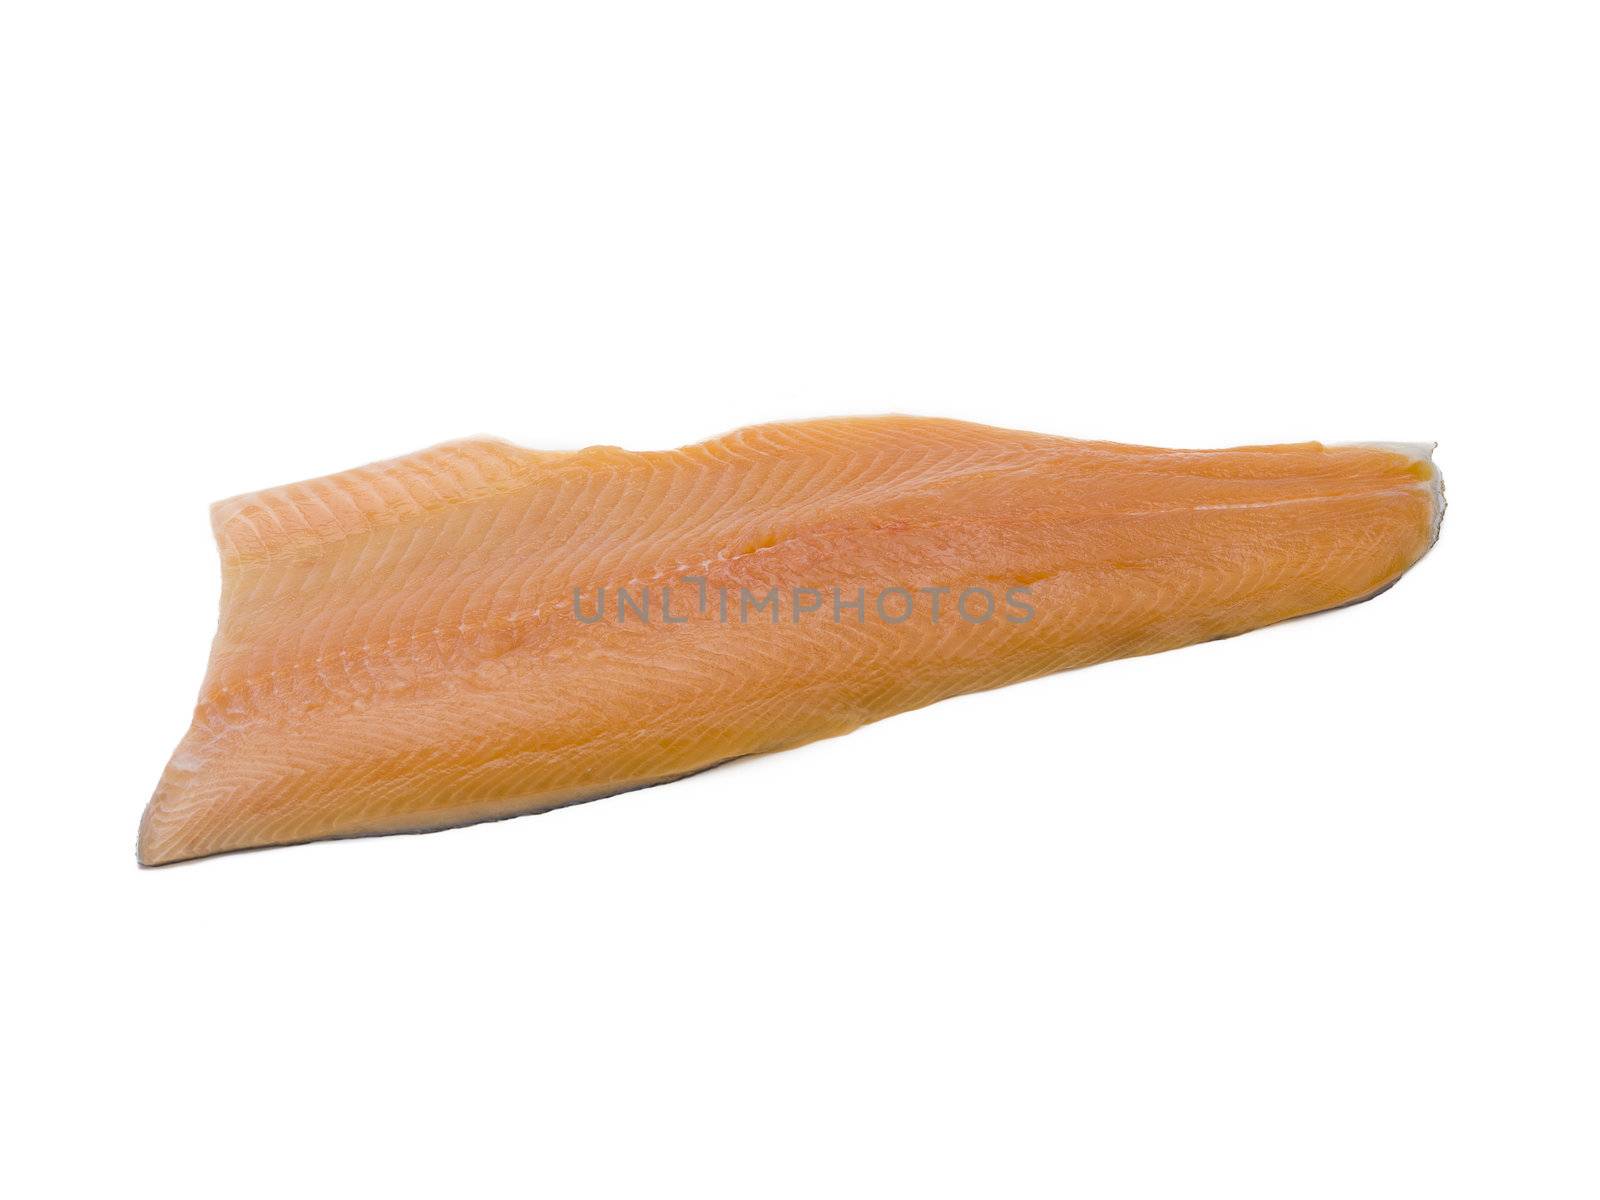 Slab of Uncooked Rainbow Trout by kozzi